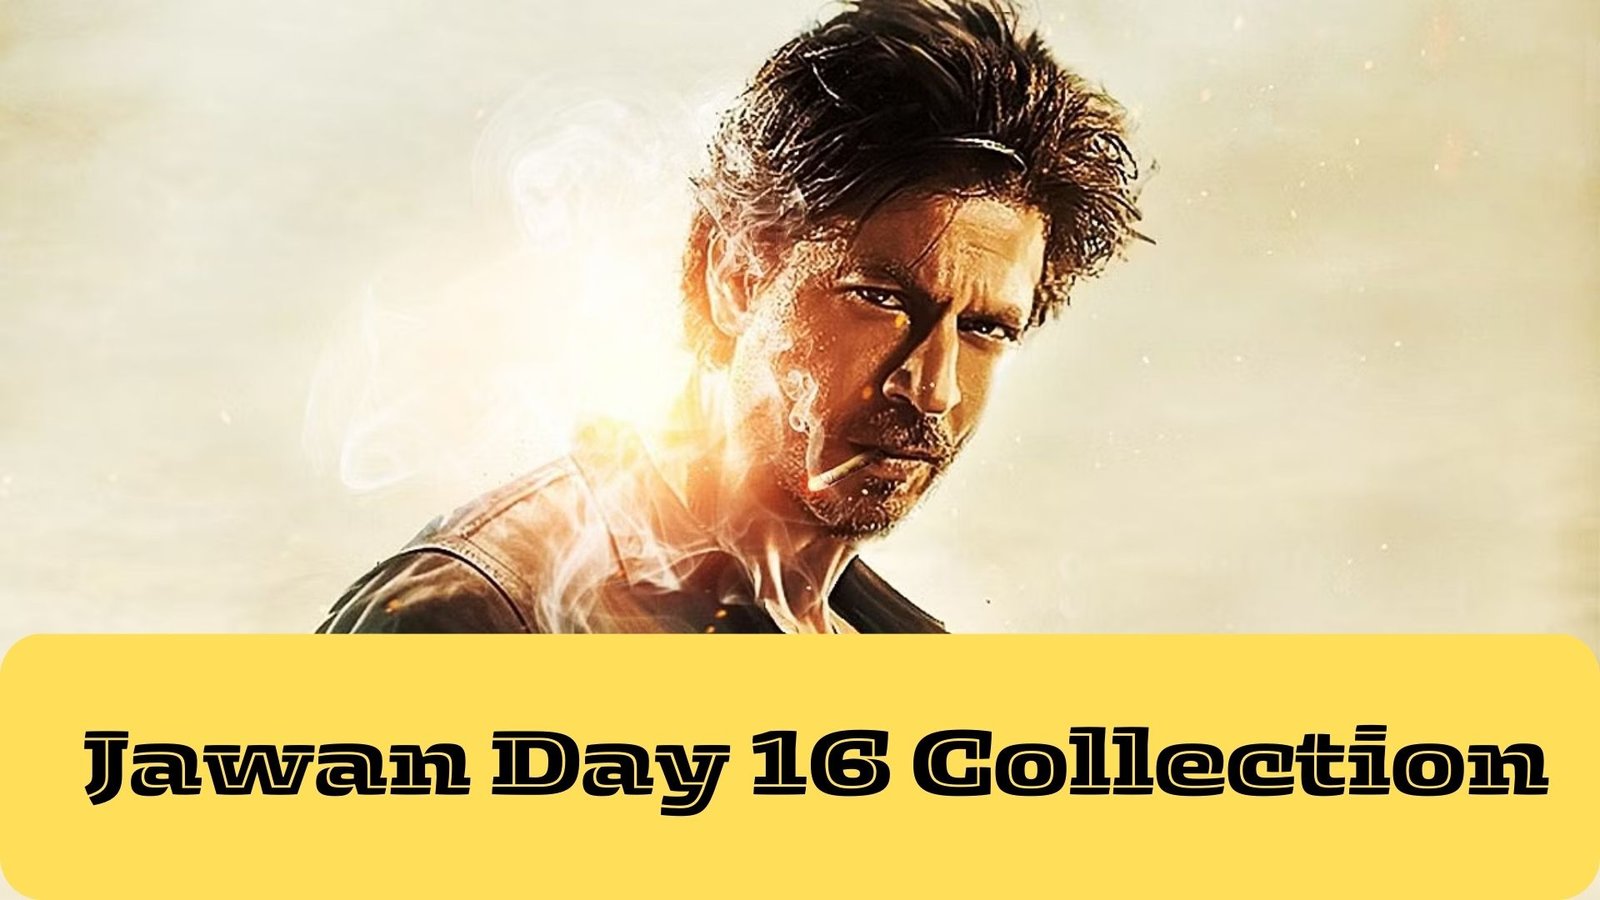 Jawan Day 16 box office collection